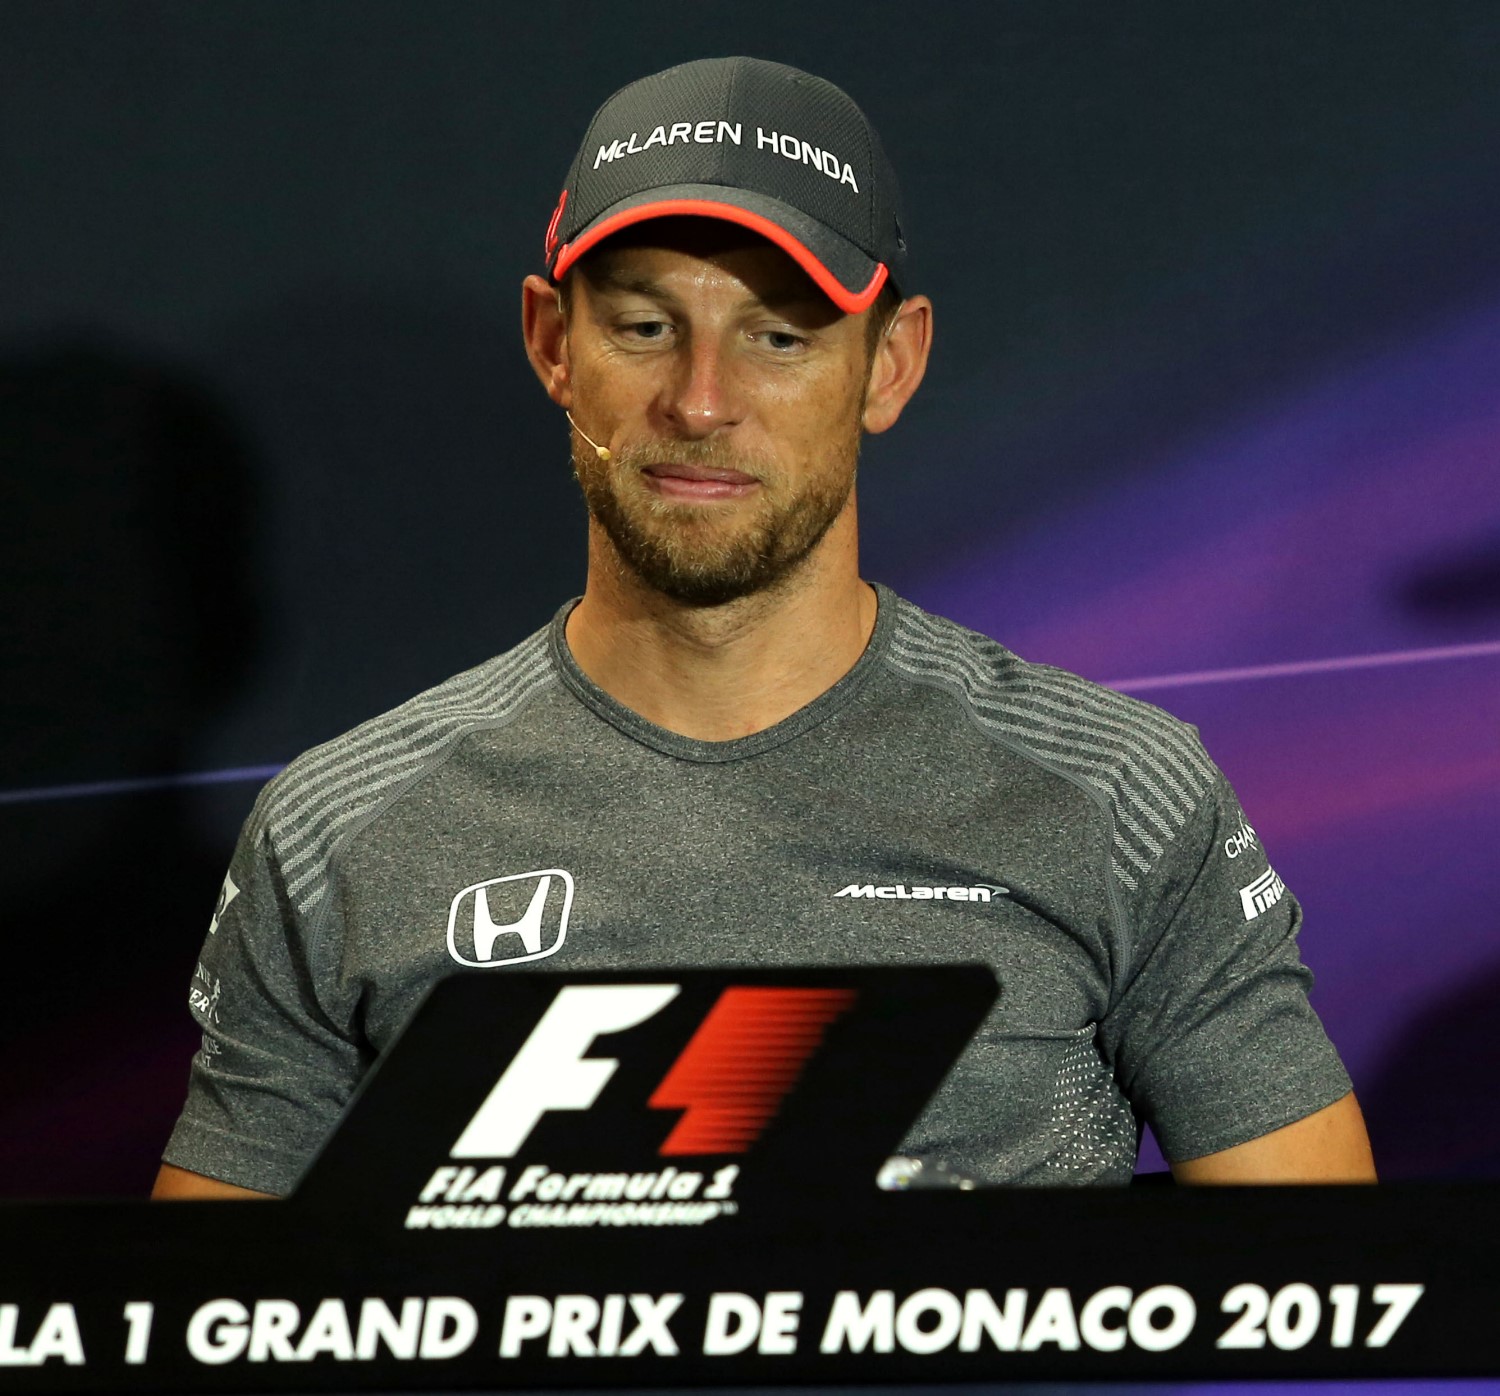 Button says racing on ovals "scares the shit out of me"